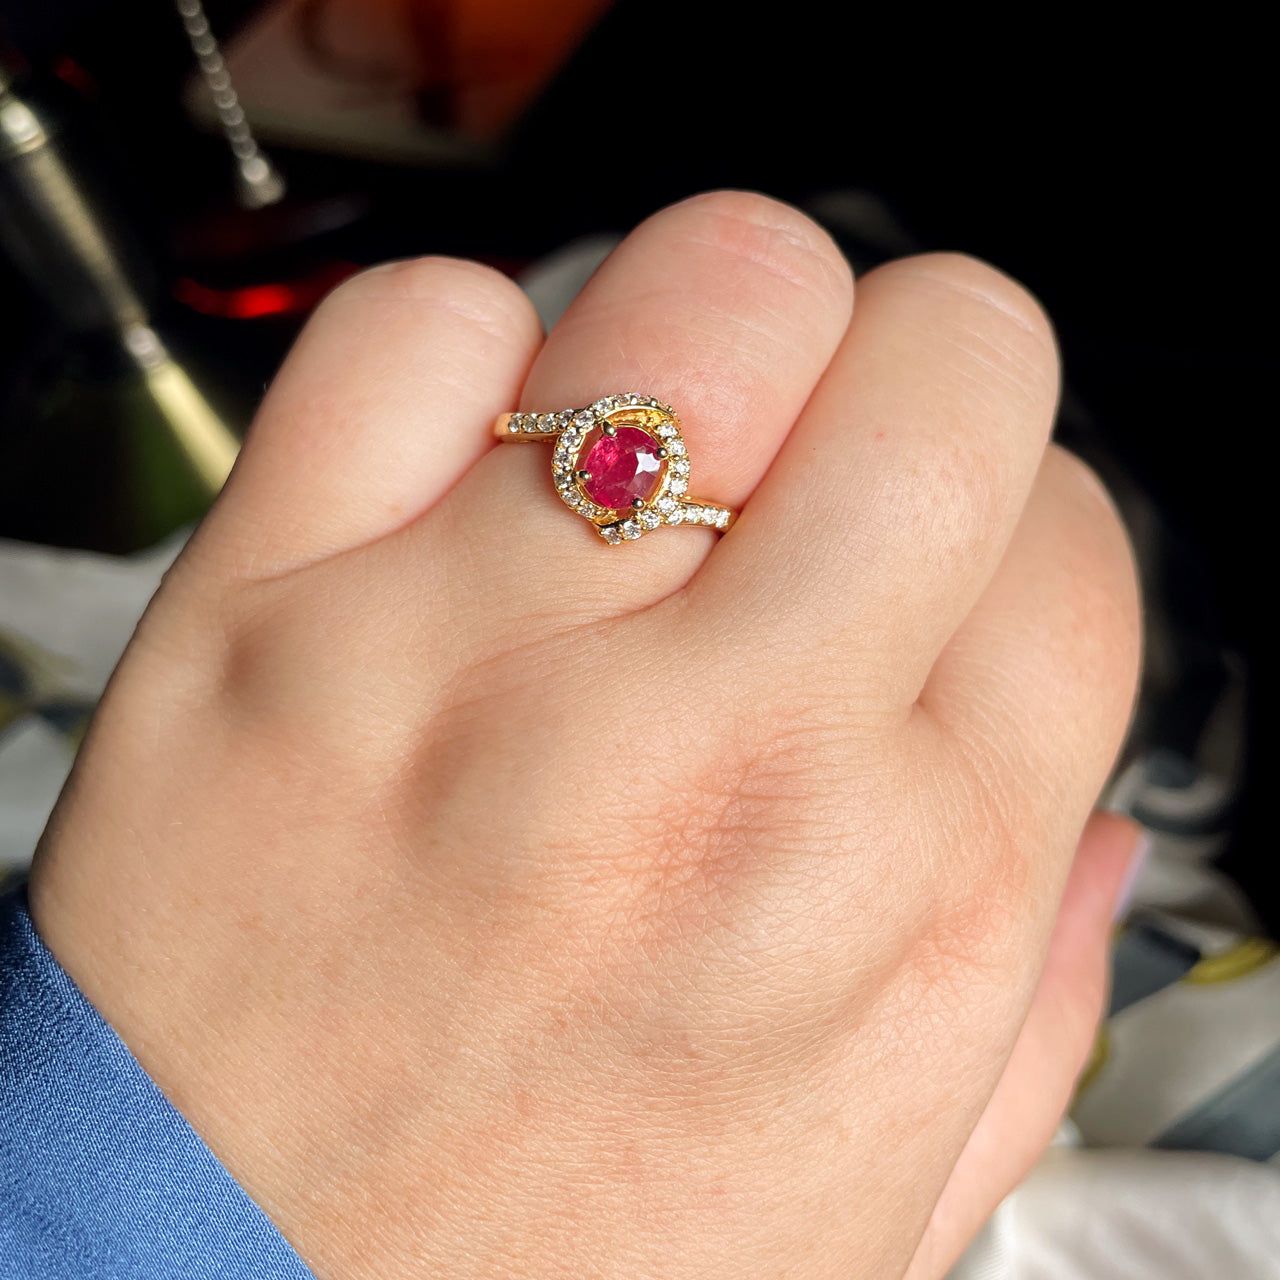 Hand model displaying a 0.54ct ruby ring made of 18k yellow gold